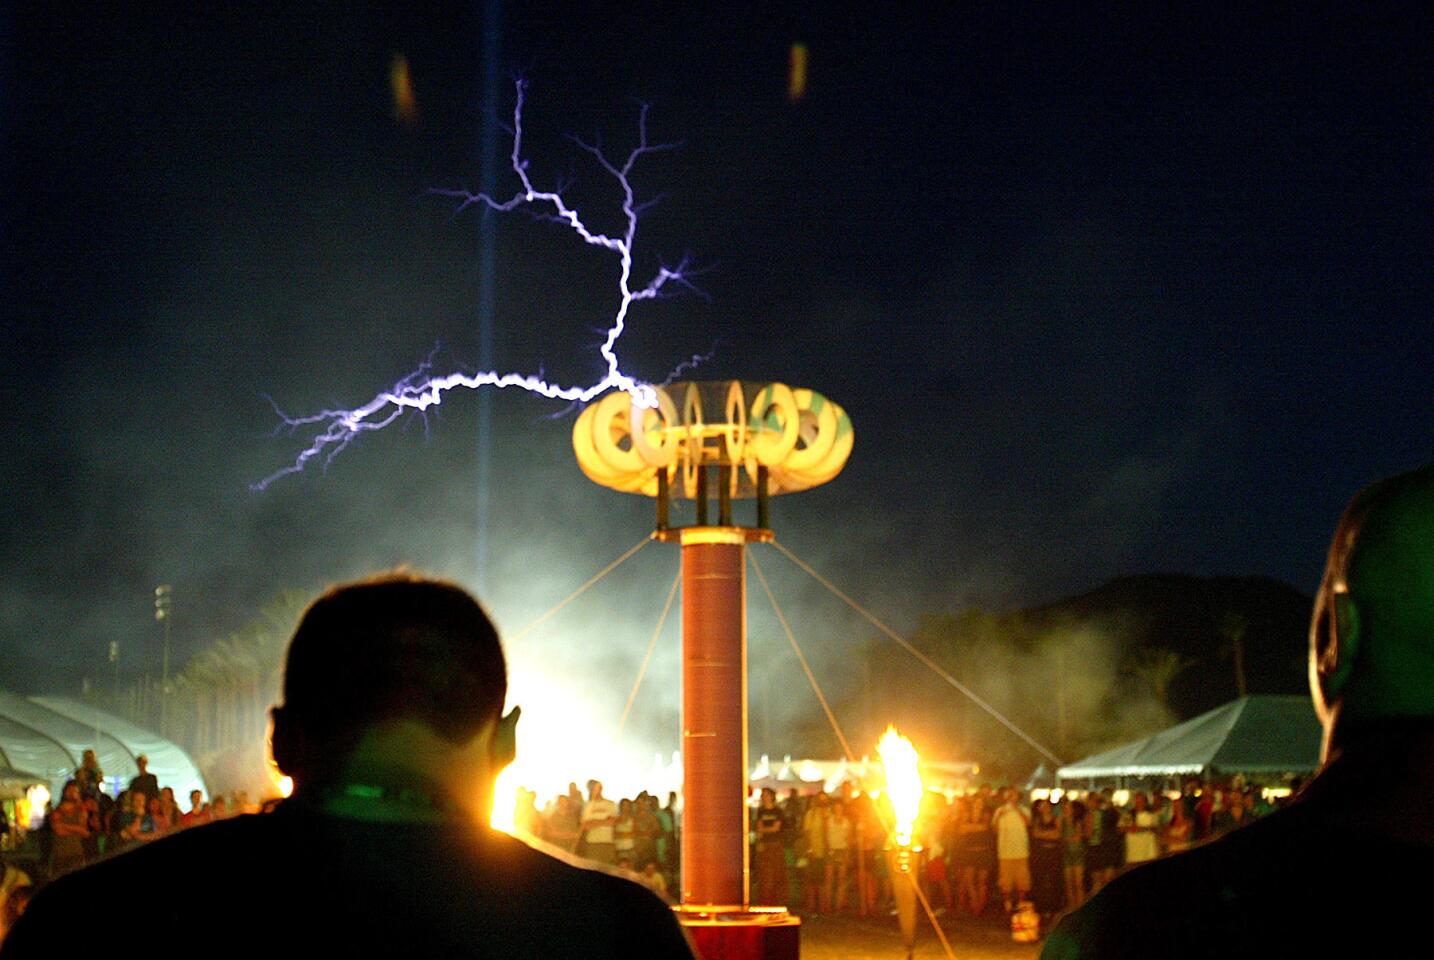 Flashes of lightning generated by artist Syd Klina hover above the crowd after the sun sets at the Coachella Music and Arts Festival in Indio, Sunday, May 2, 2004.